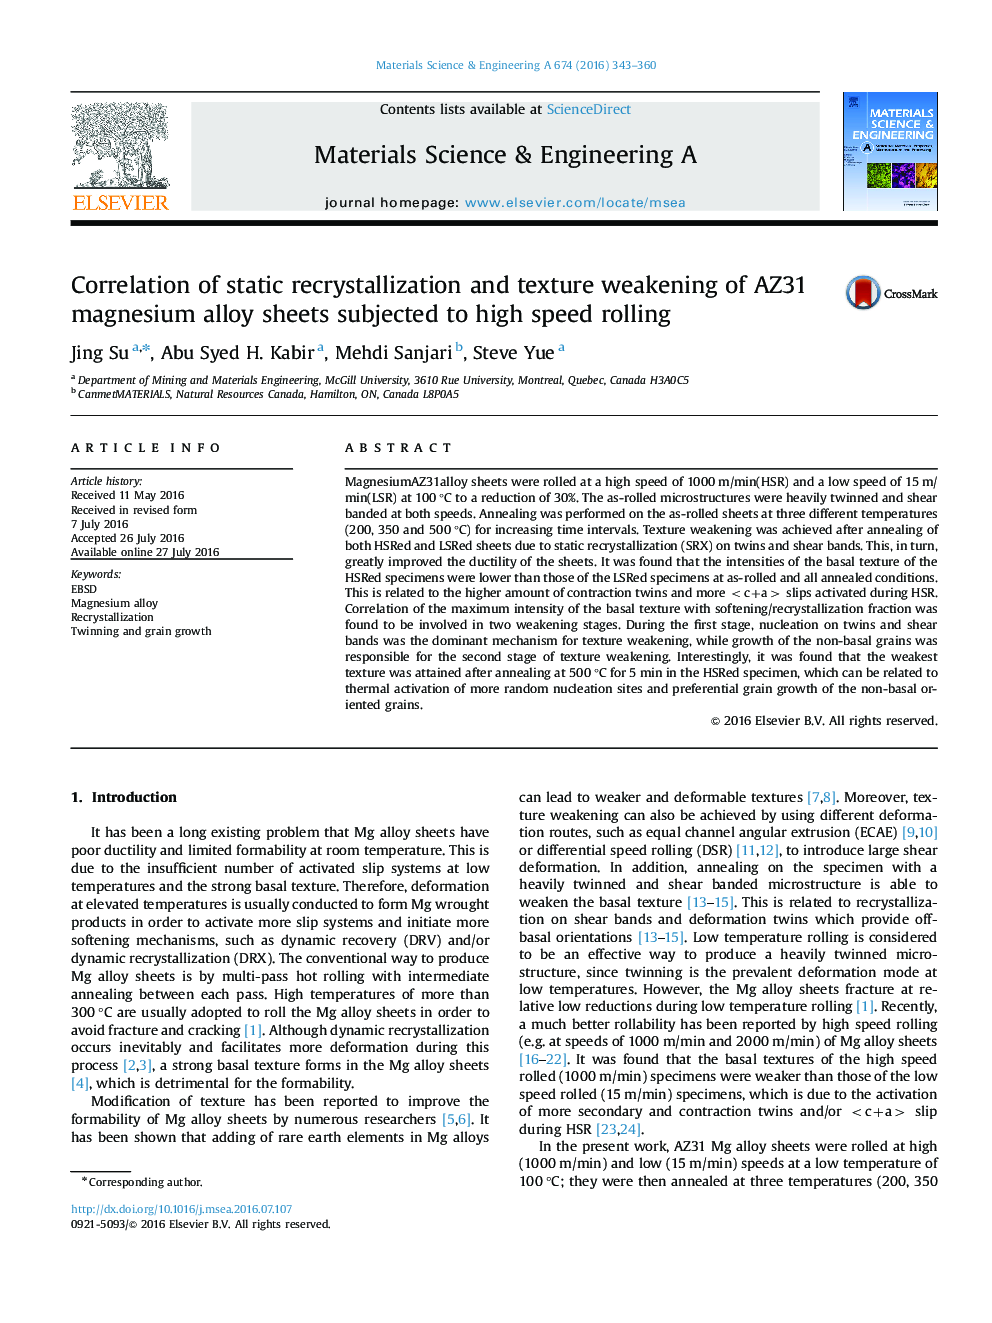 Correlation of static recrystallization and texture weakening of AZ31 magnesium alloy sheets subjected to high speed rolling